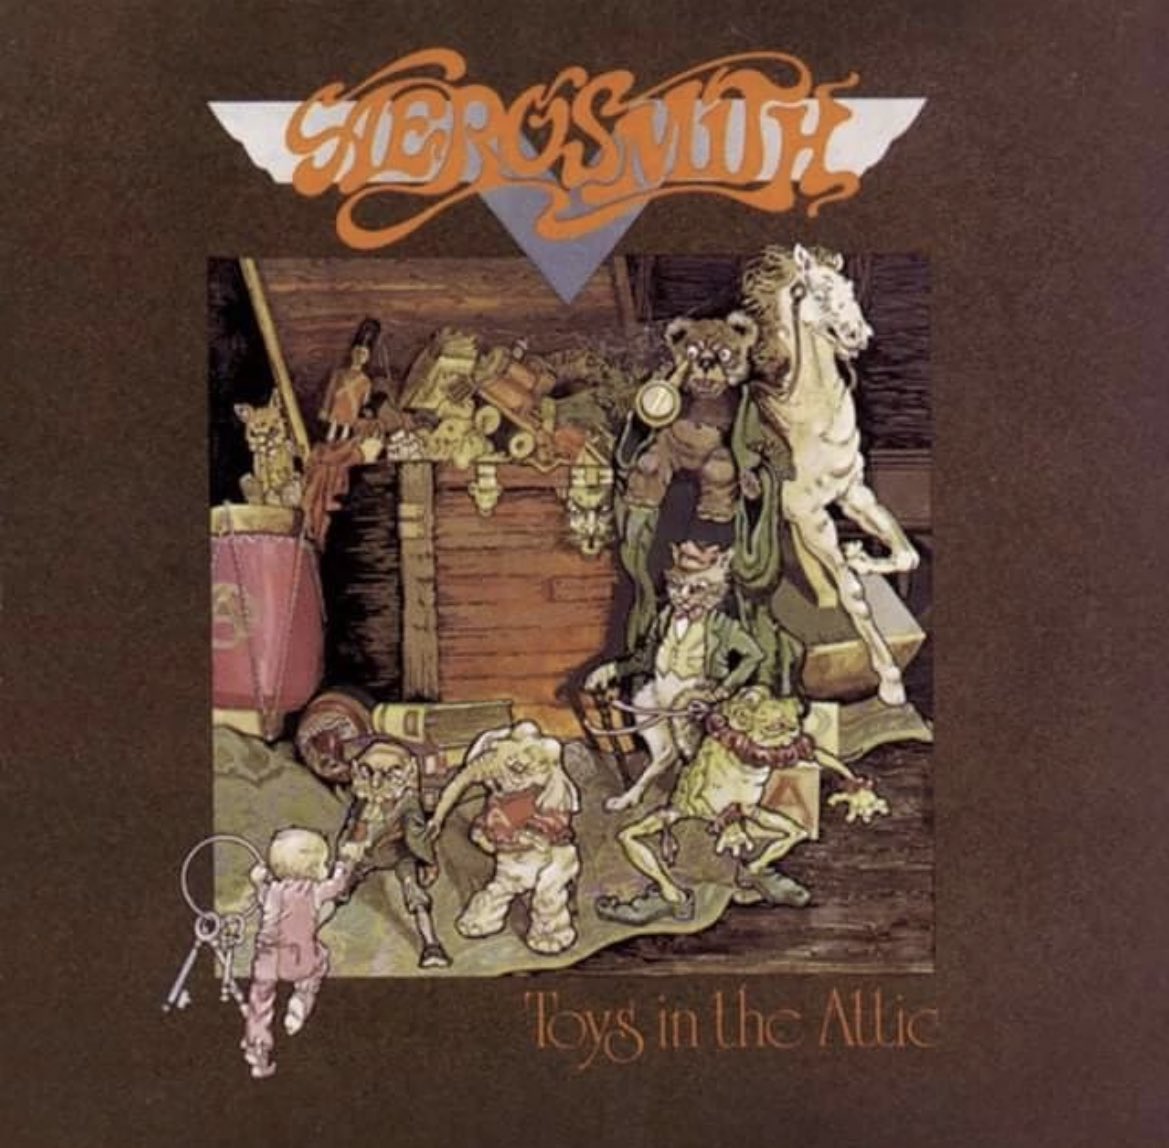 “RETWEET” if TOYS IN THE ATTIC is your favorite Album by Aerosmith!!